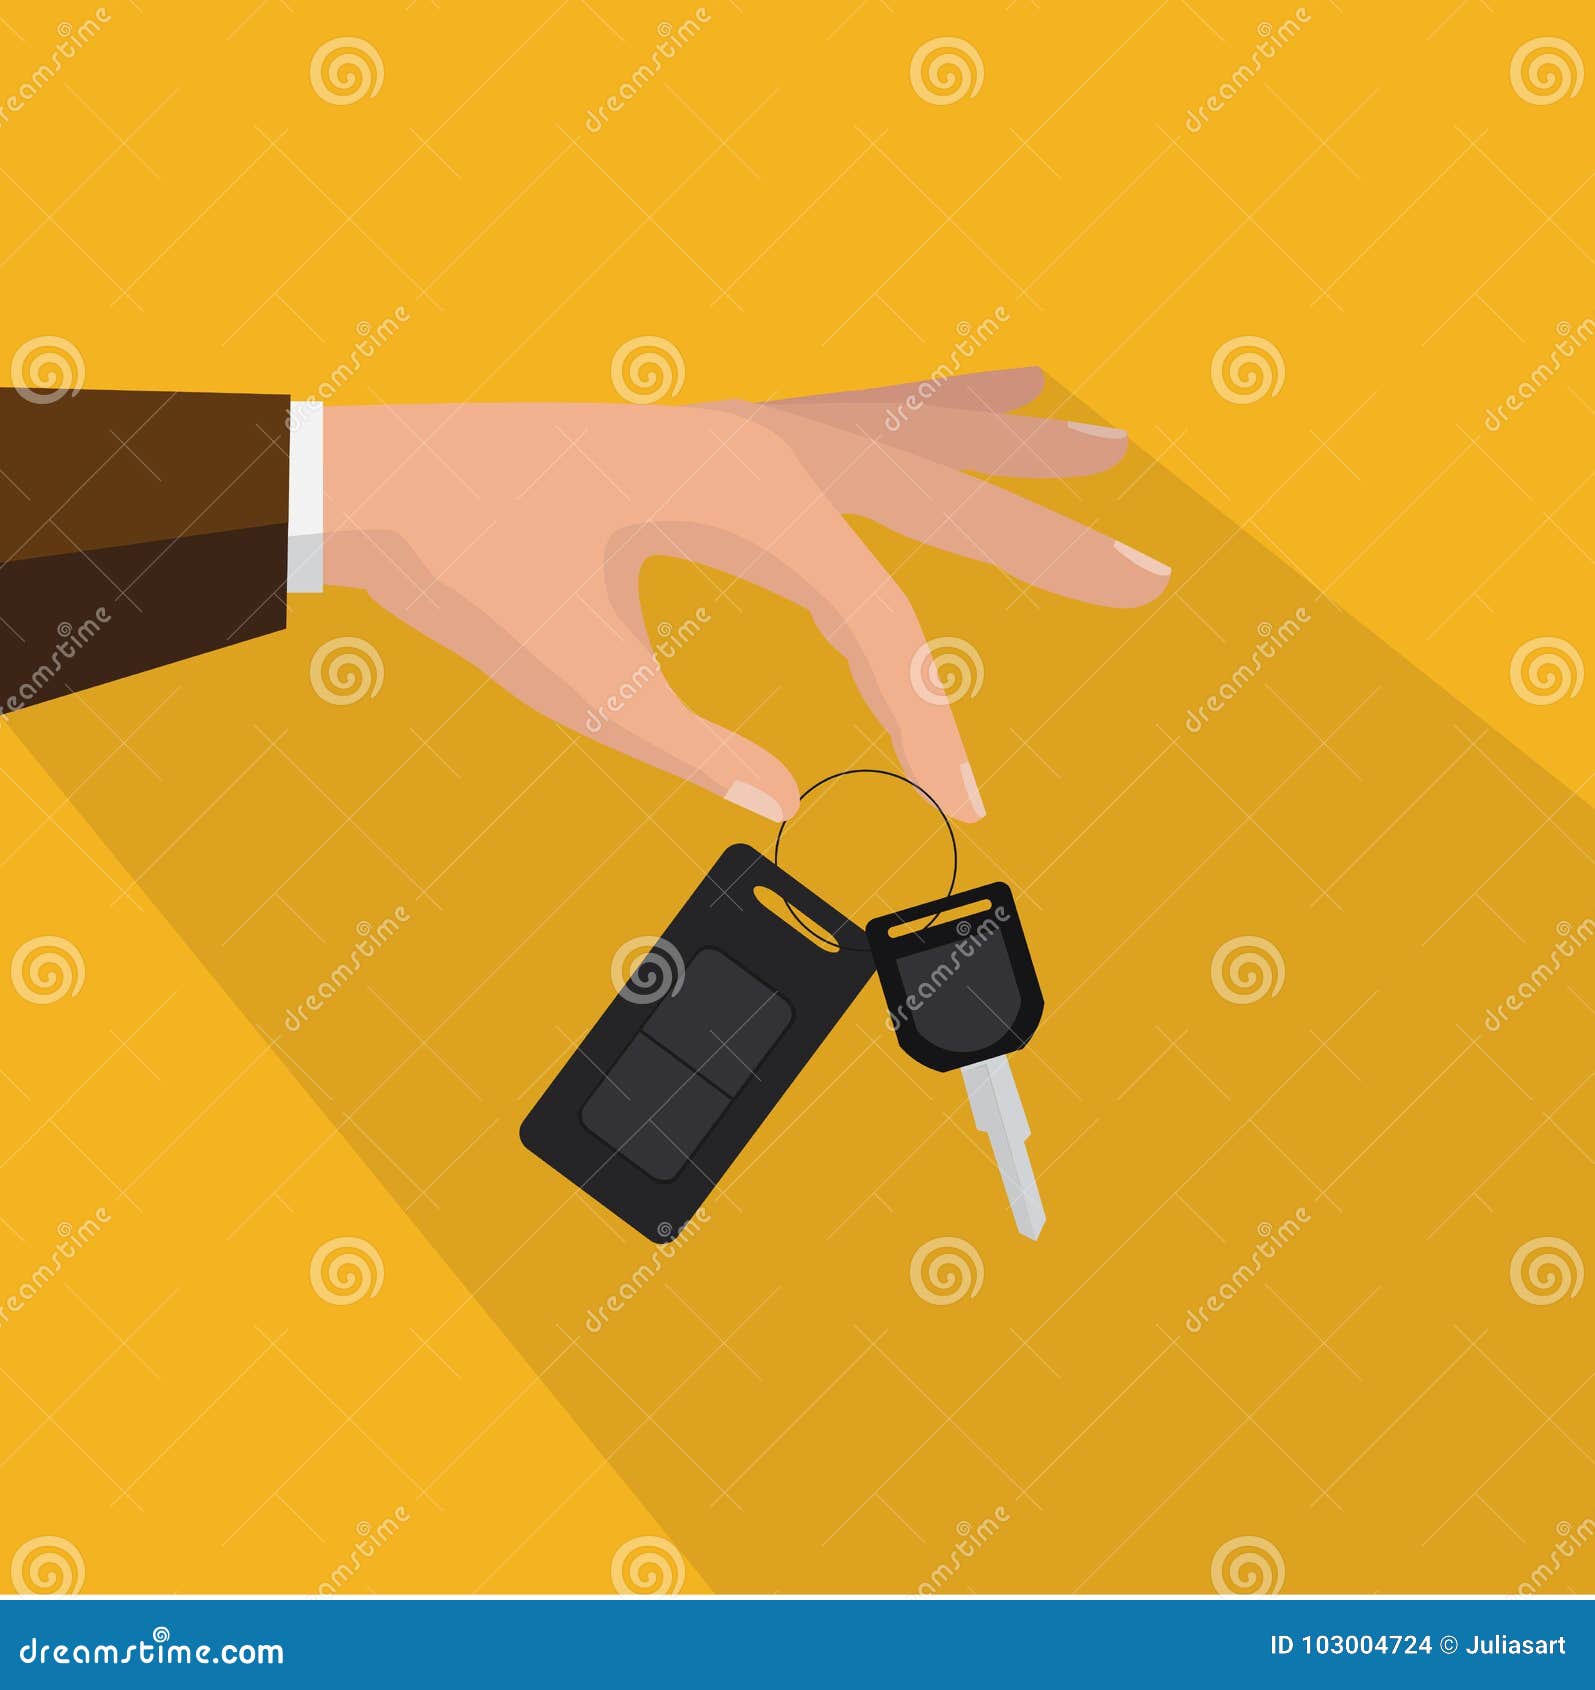 Hand Holding Car Keys with Chain. Vector Illustration Stock ...